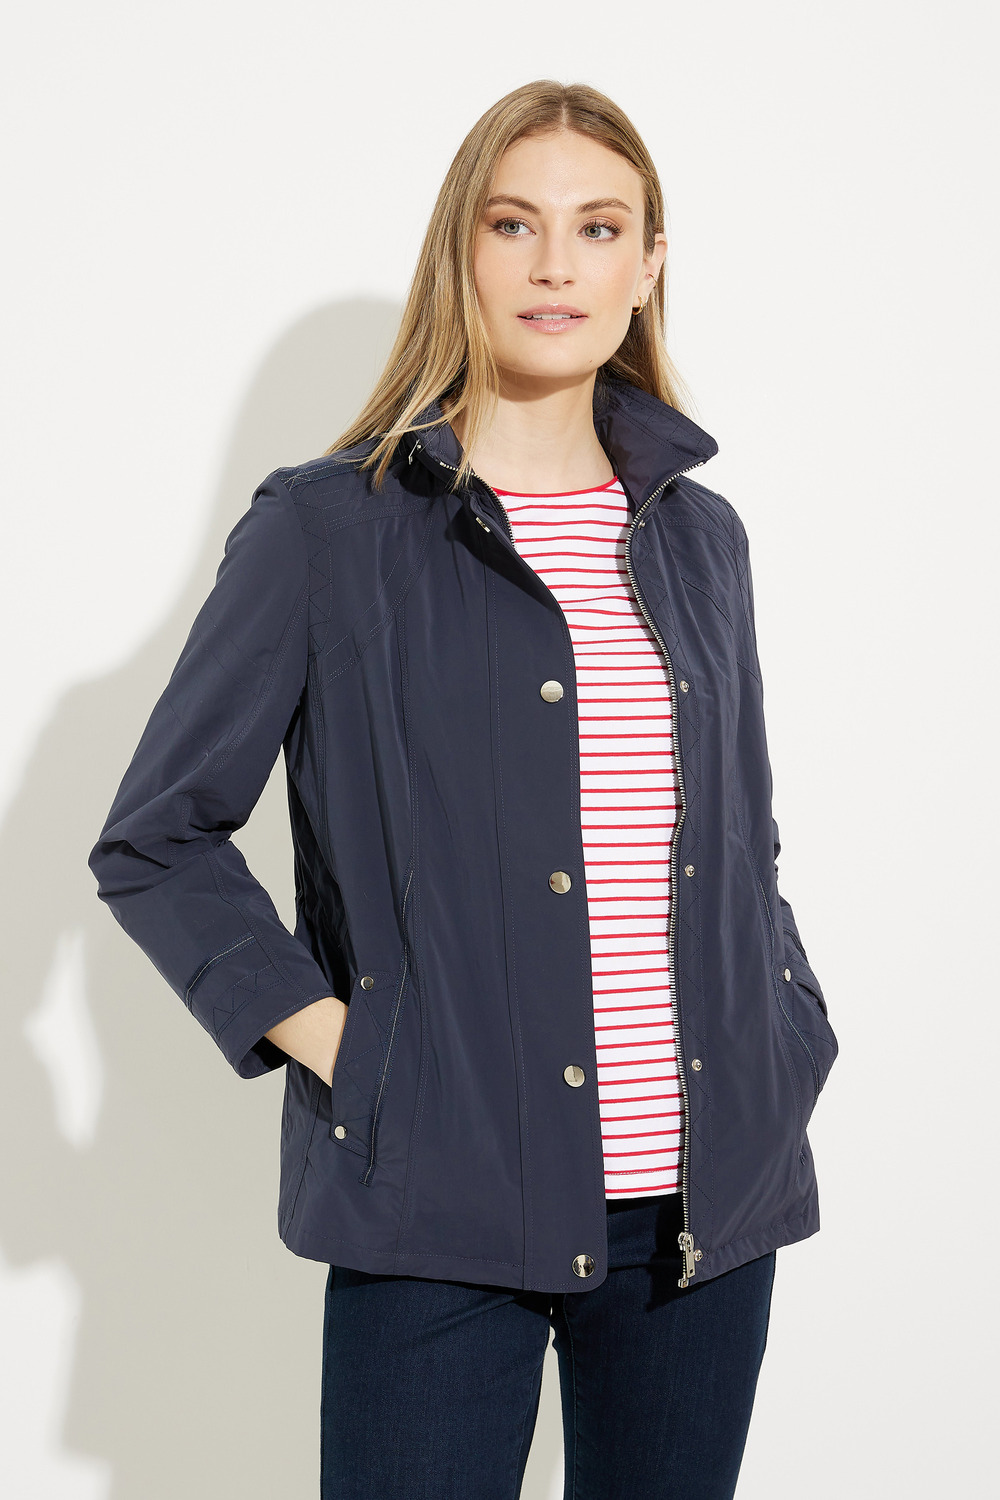 Button Front Jacket Style A41182. Navy